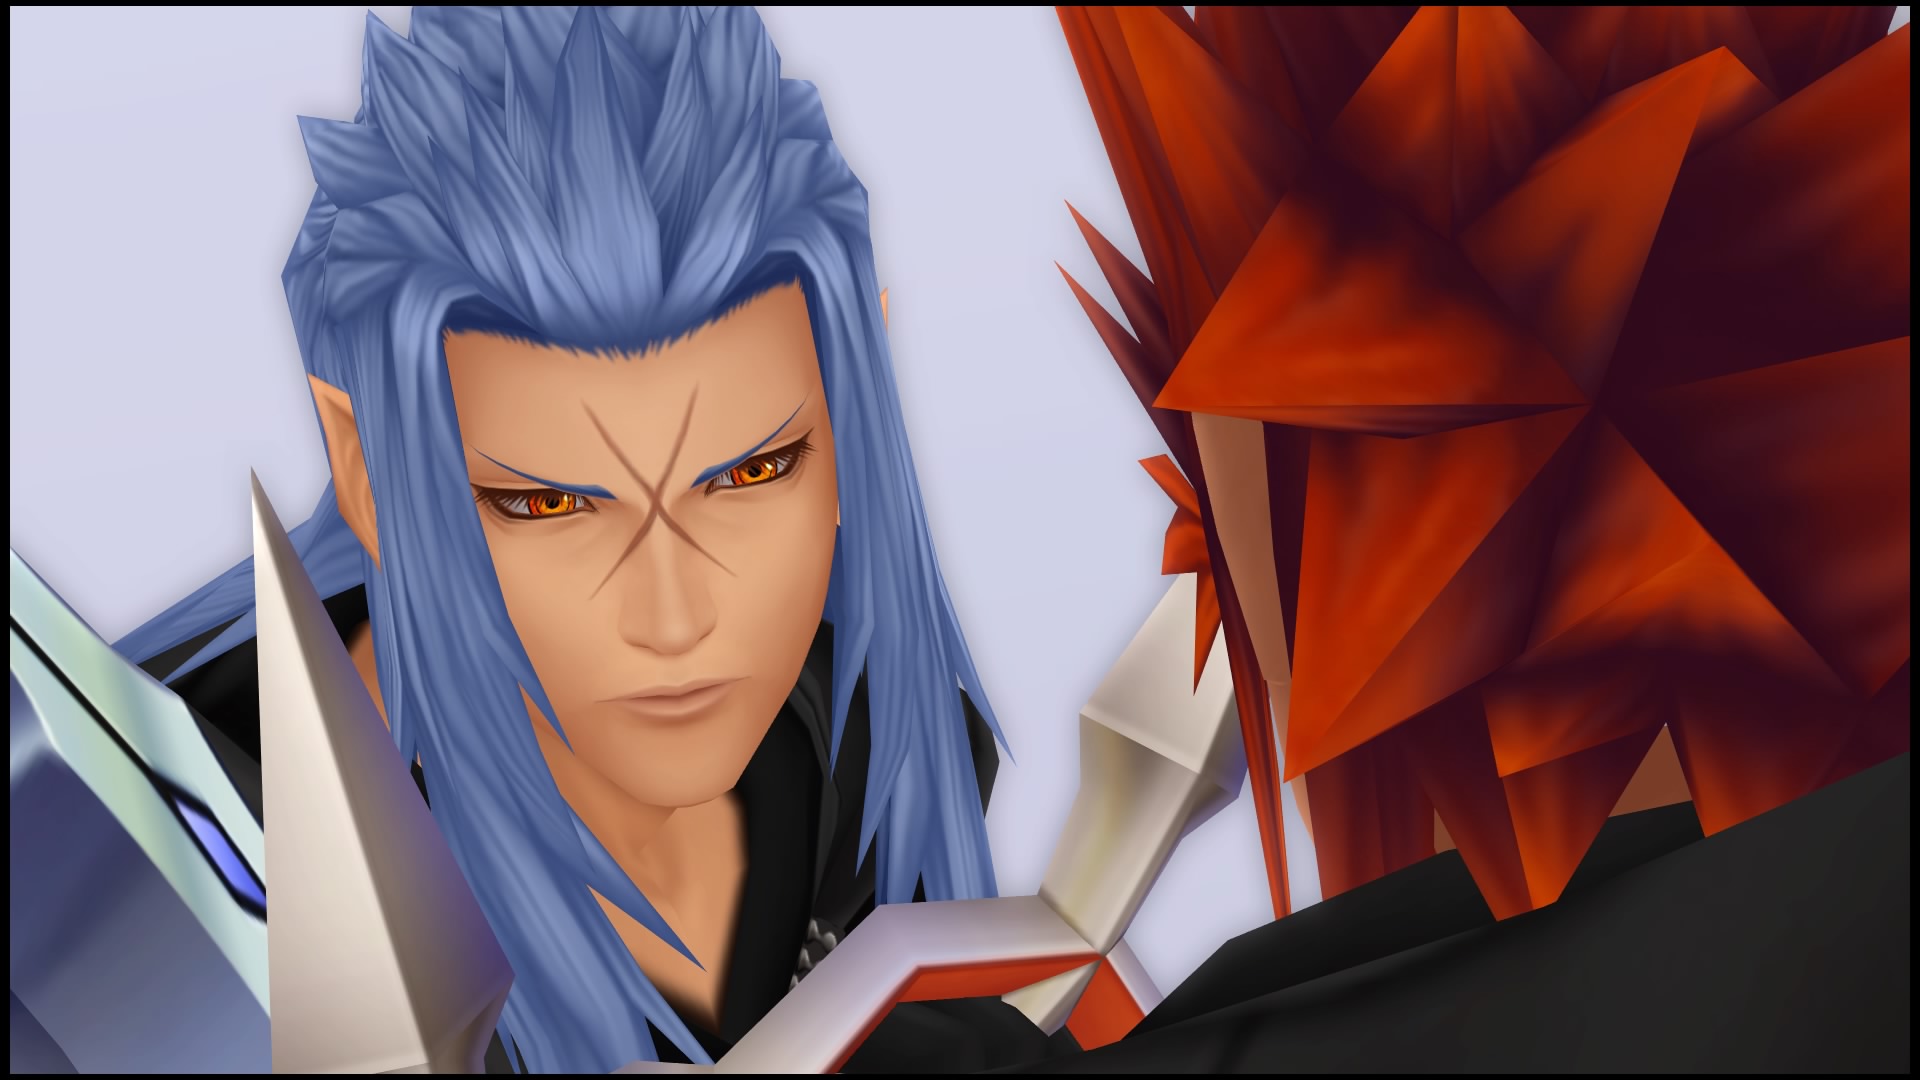 Saix Is An Unwilling Seeker Of Darkness Kh Theories Saïx is a character fro...